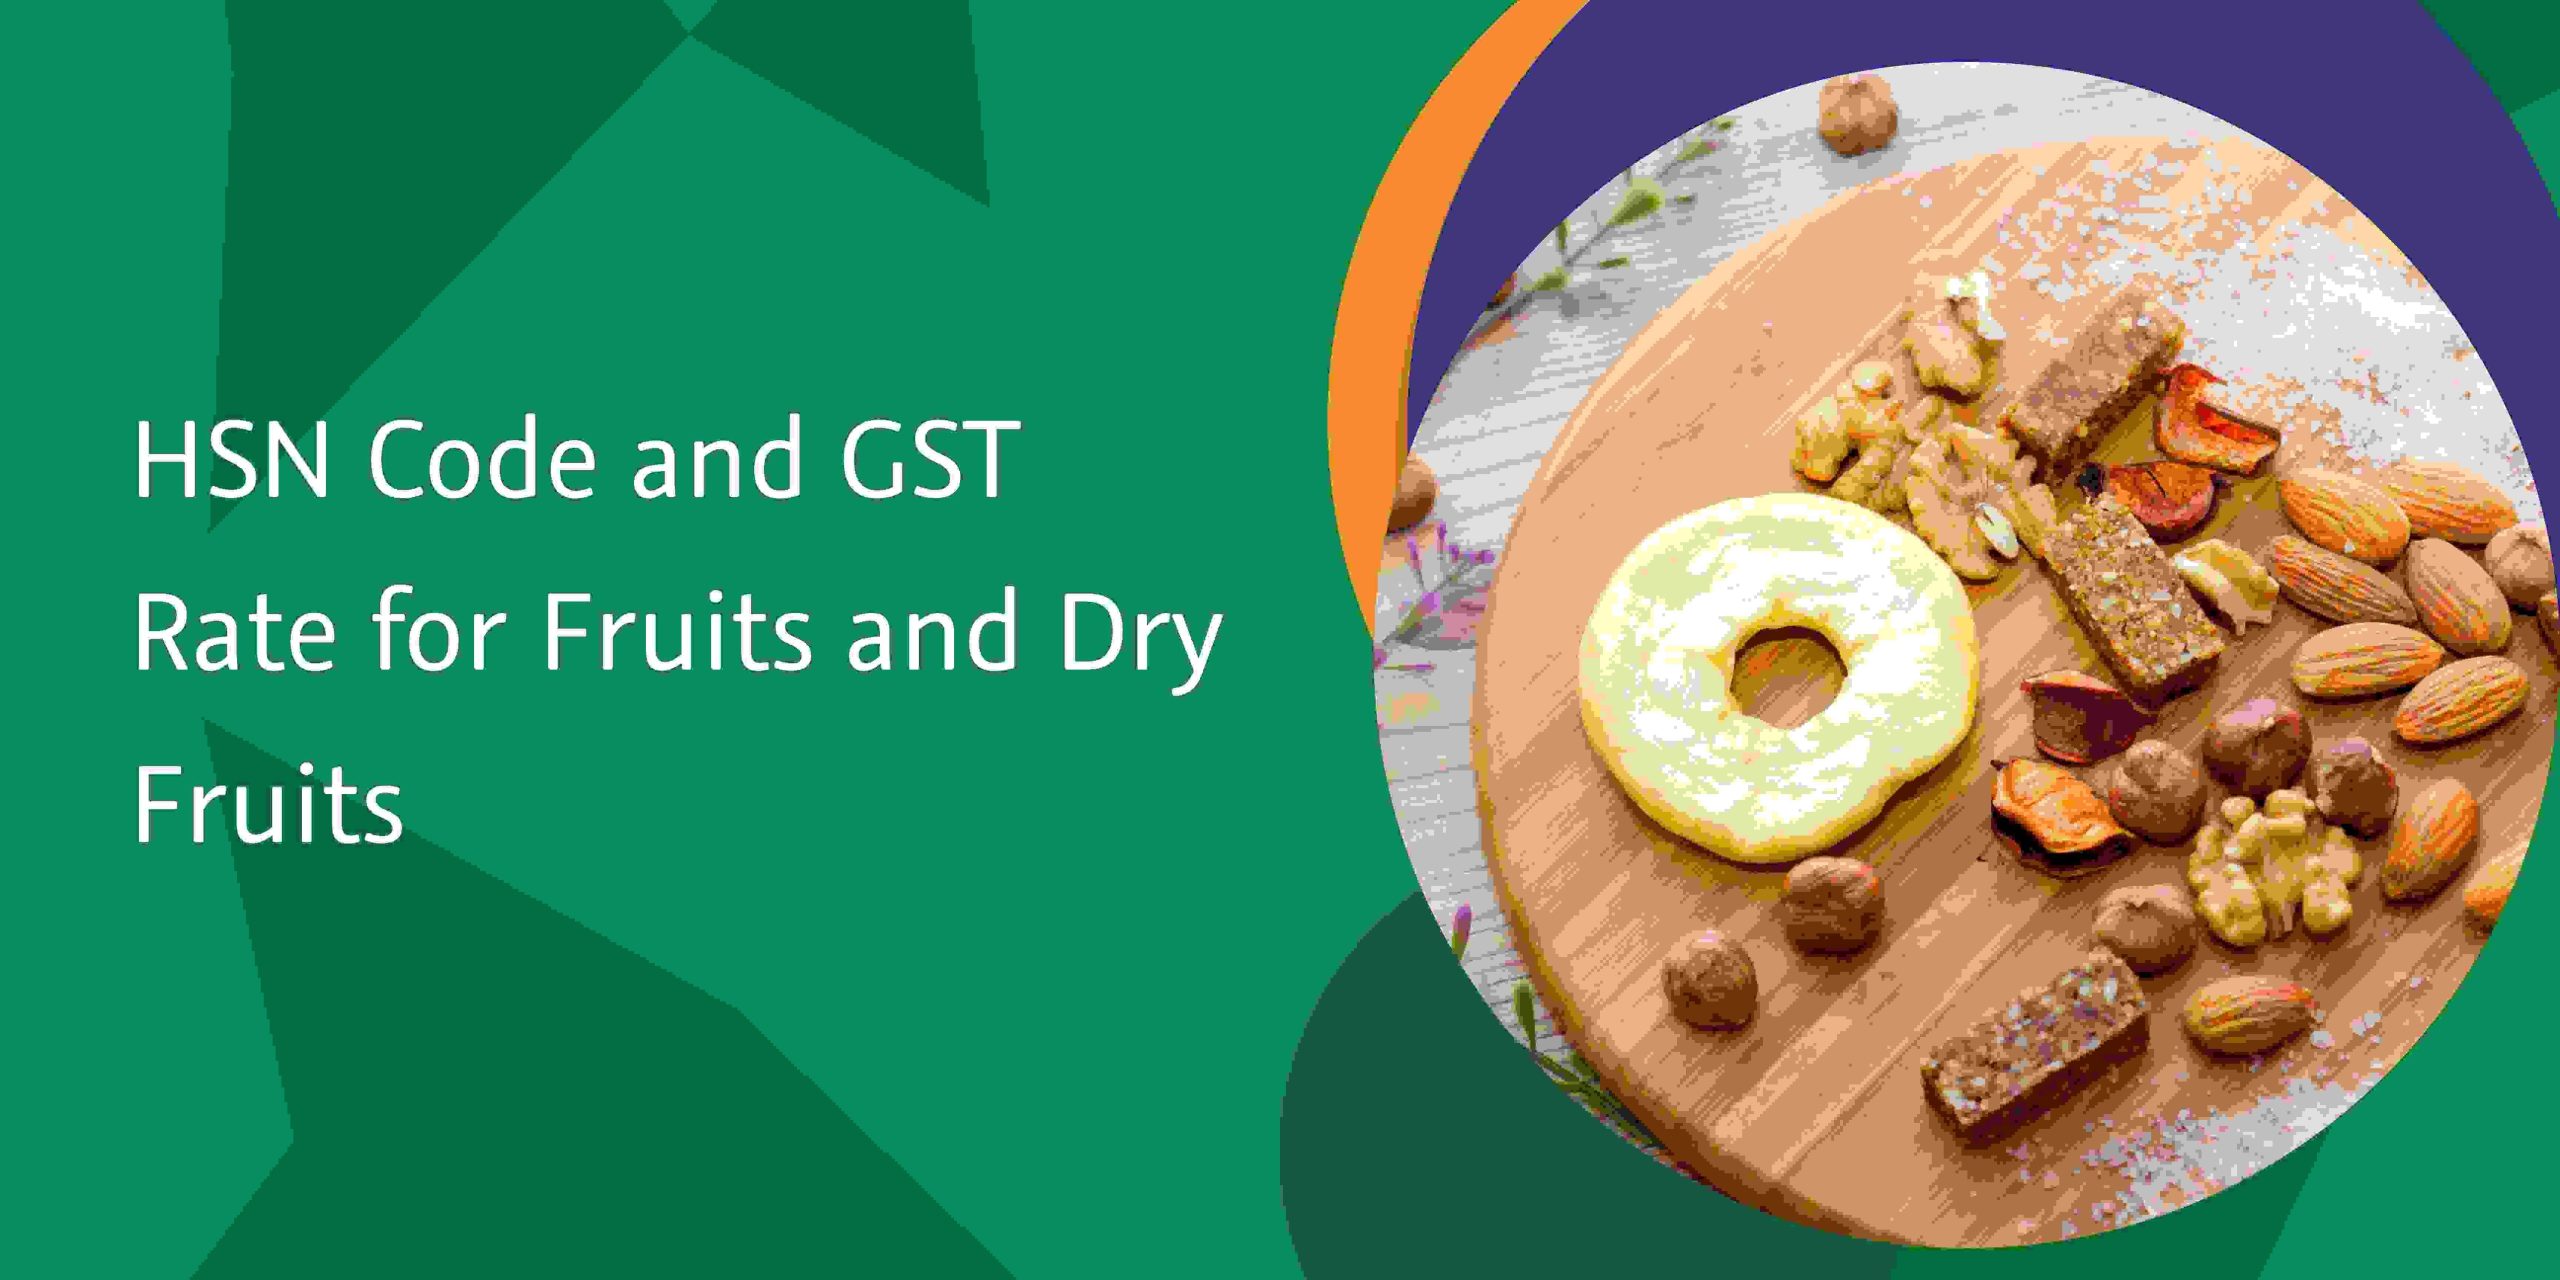 CaptainBiz: HSN Code and GST Rate for Fruits and Dry Fruits